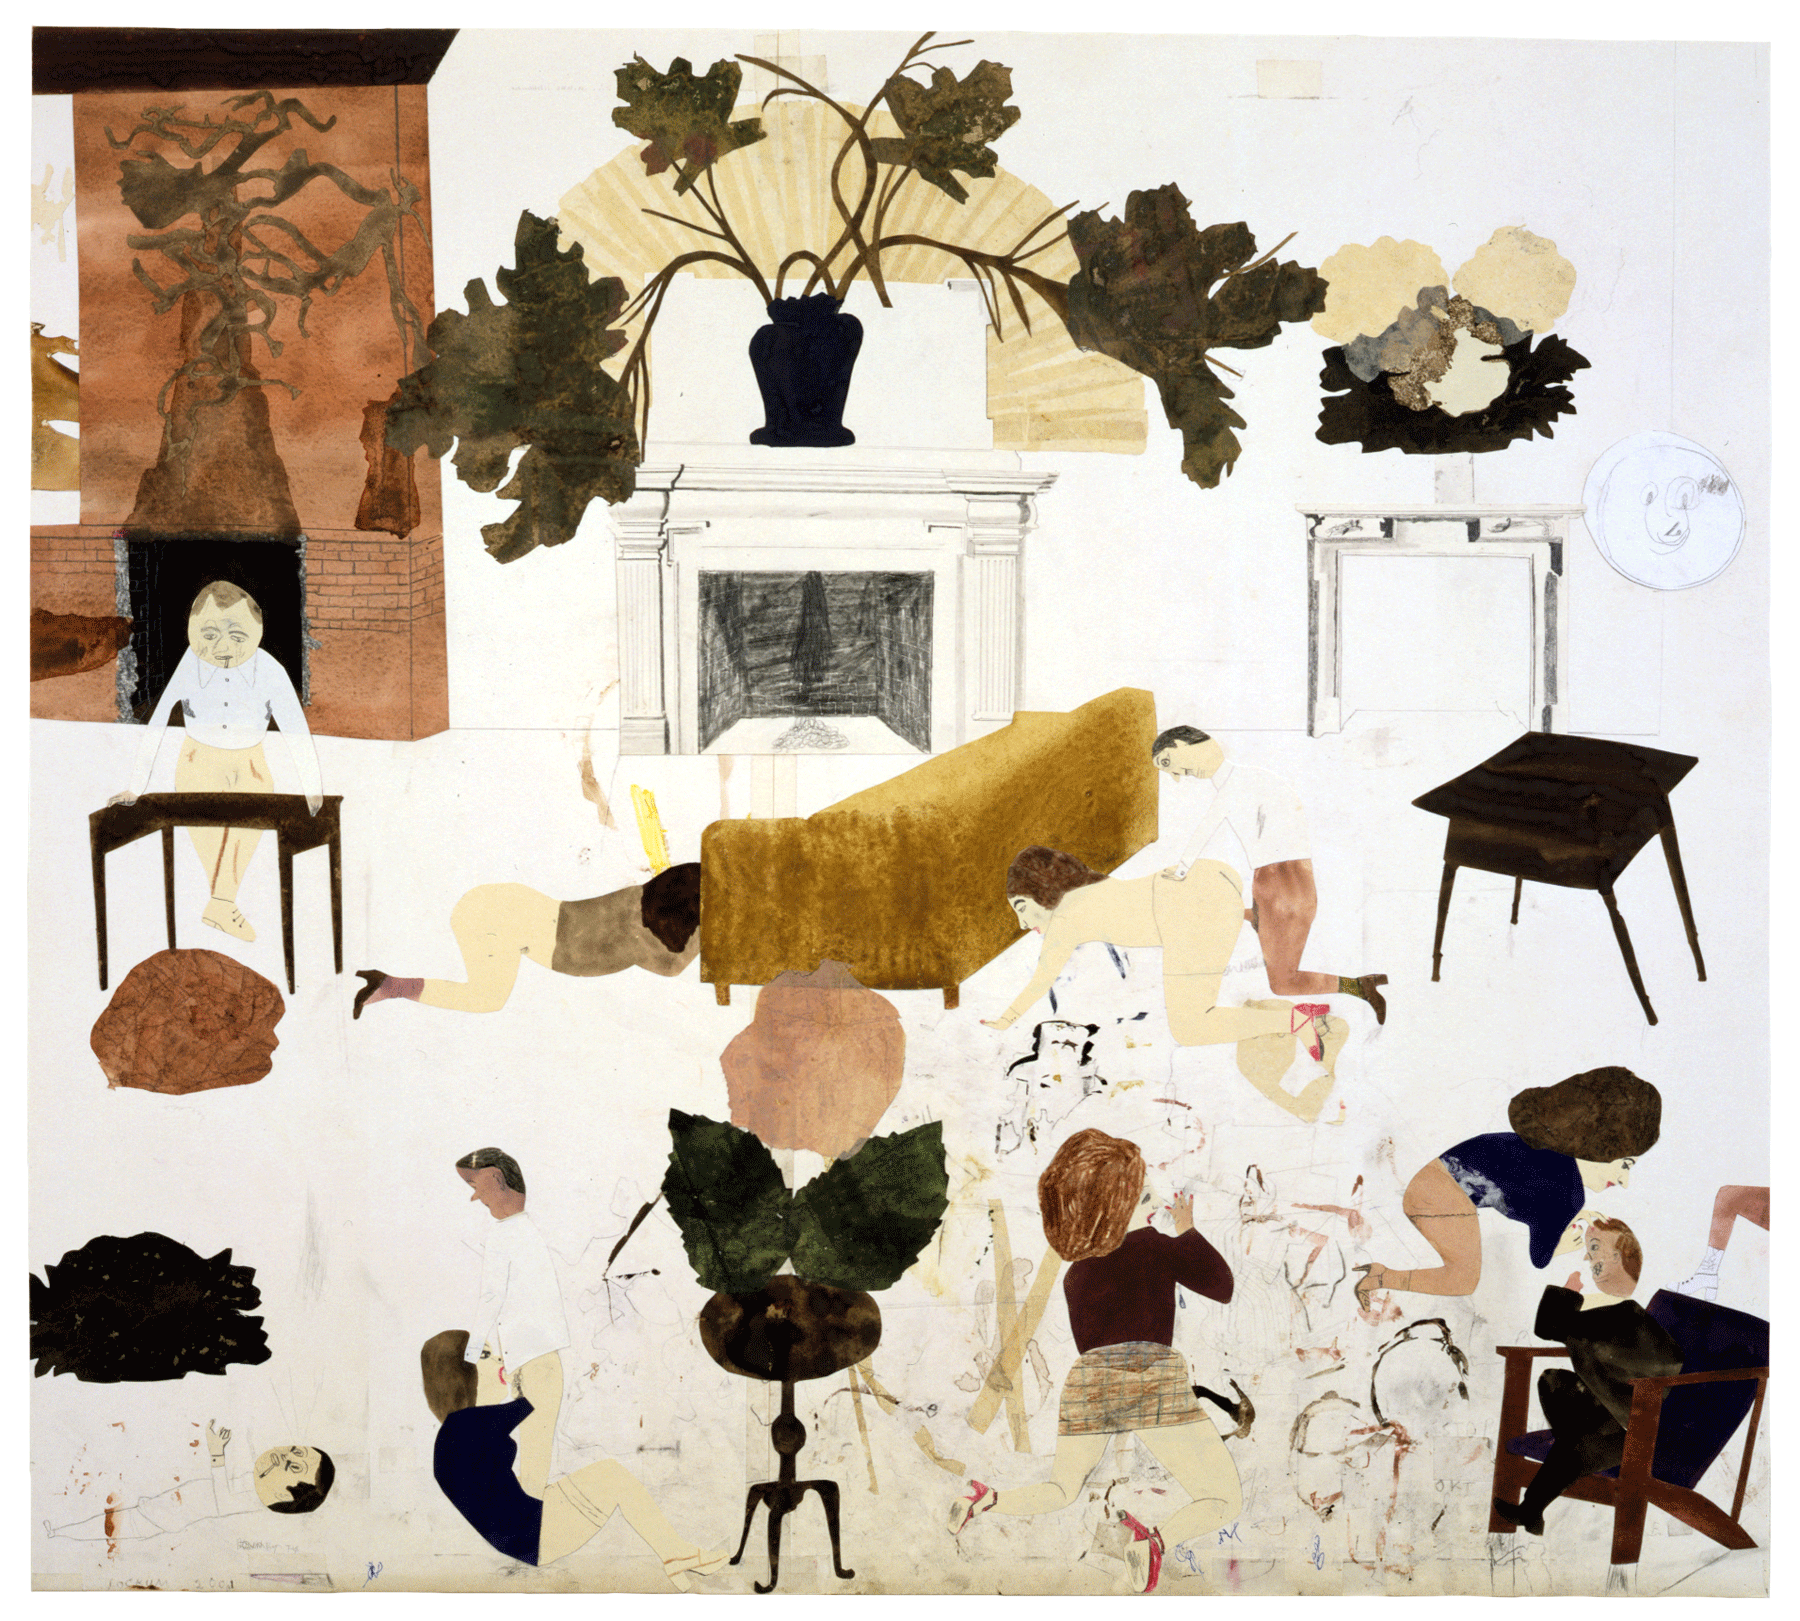 A work on paper by Jockum Nordstr√∂m, titled Every Cabin Needs A Fireplace, dated 2001